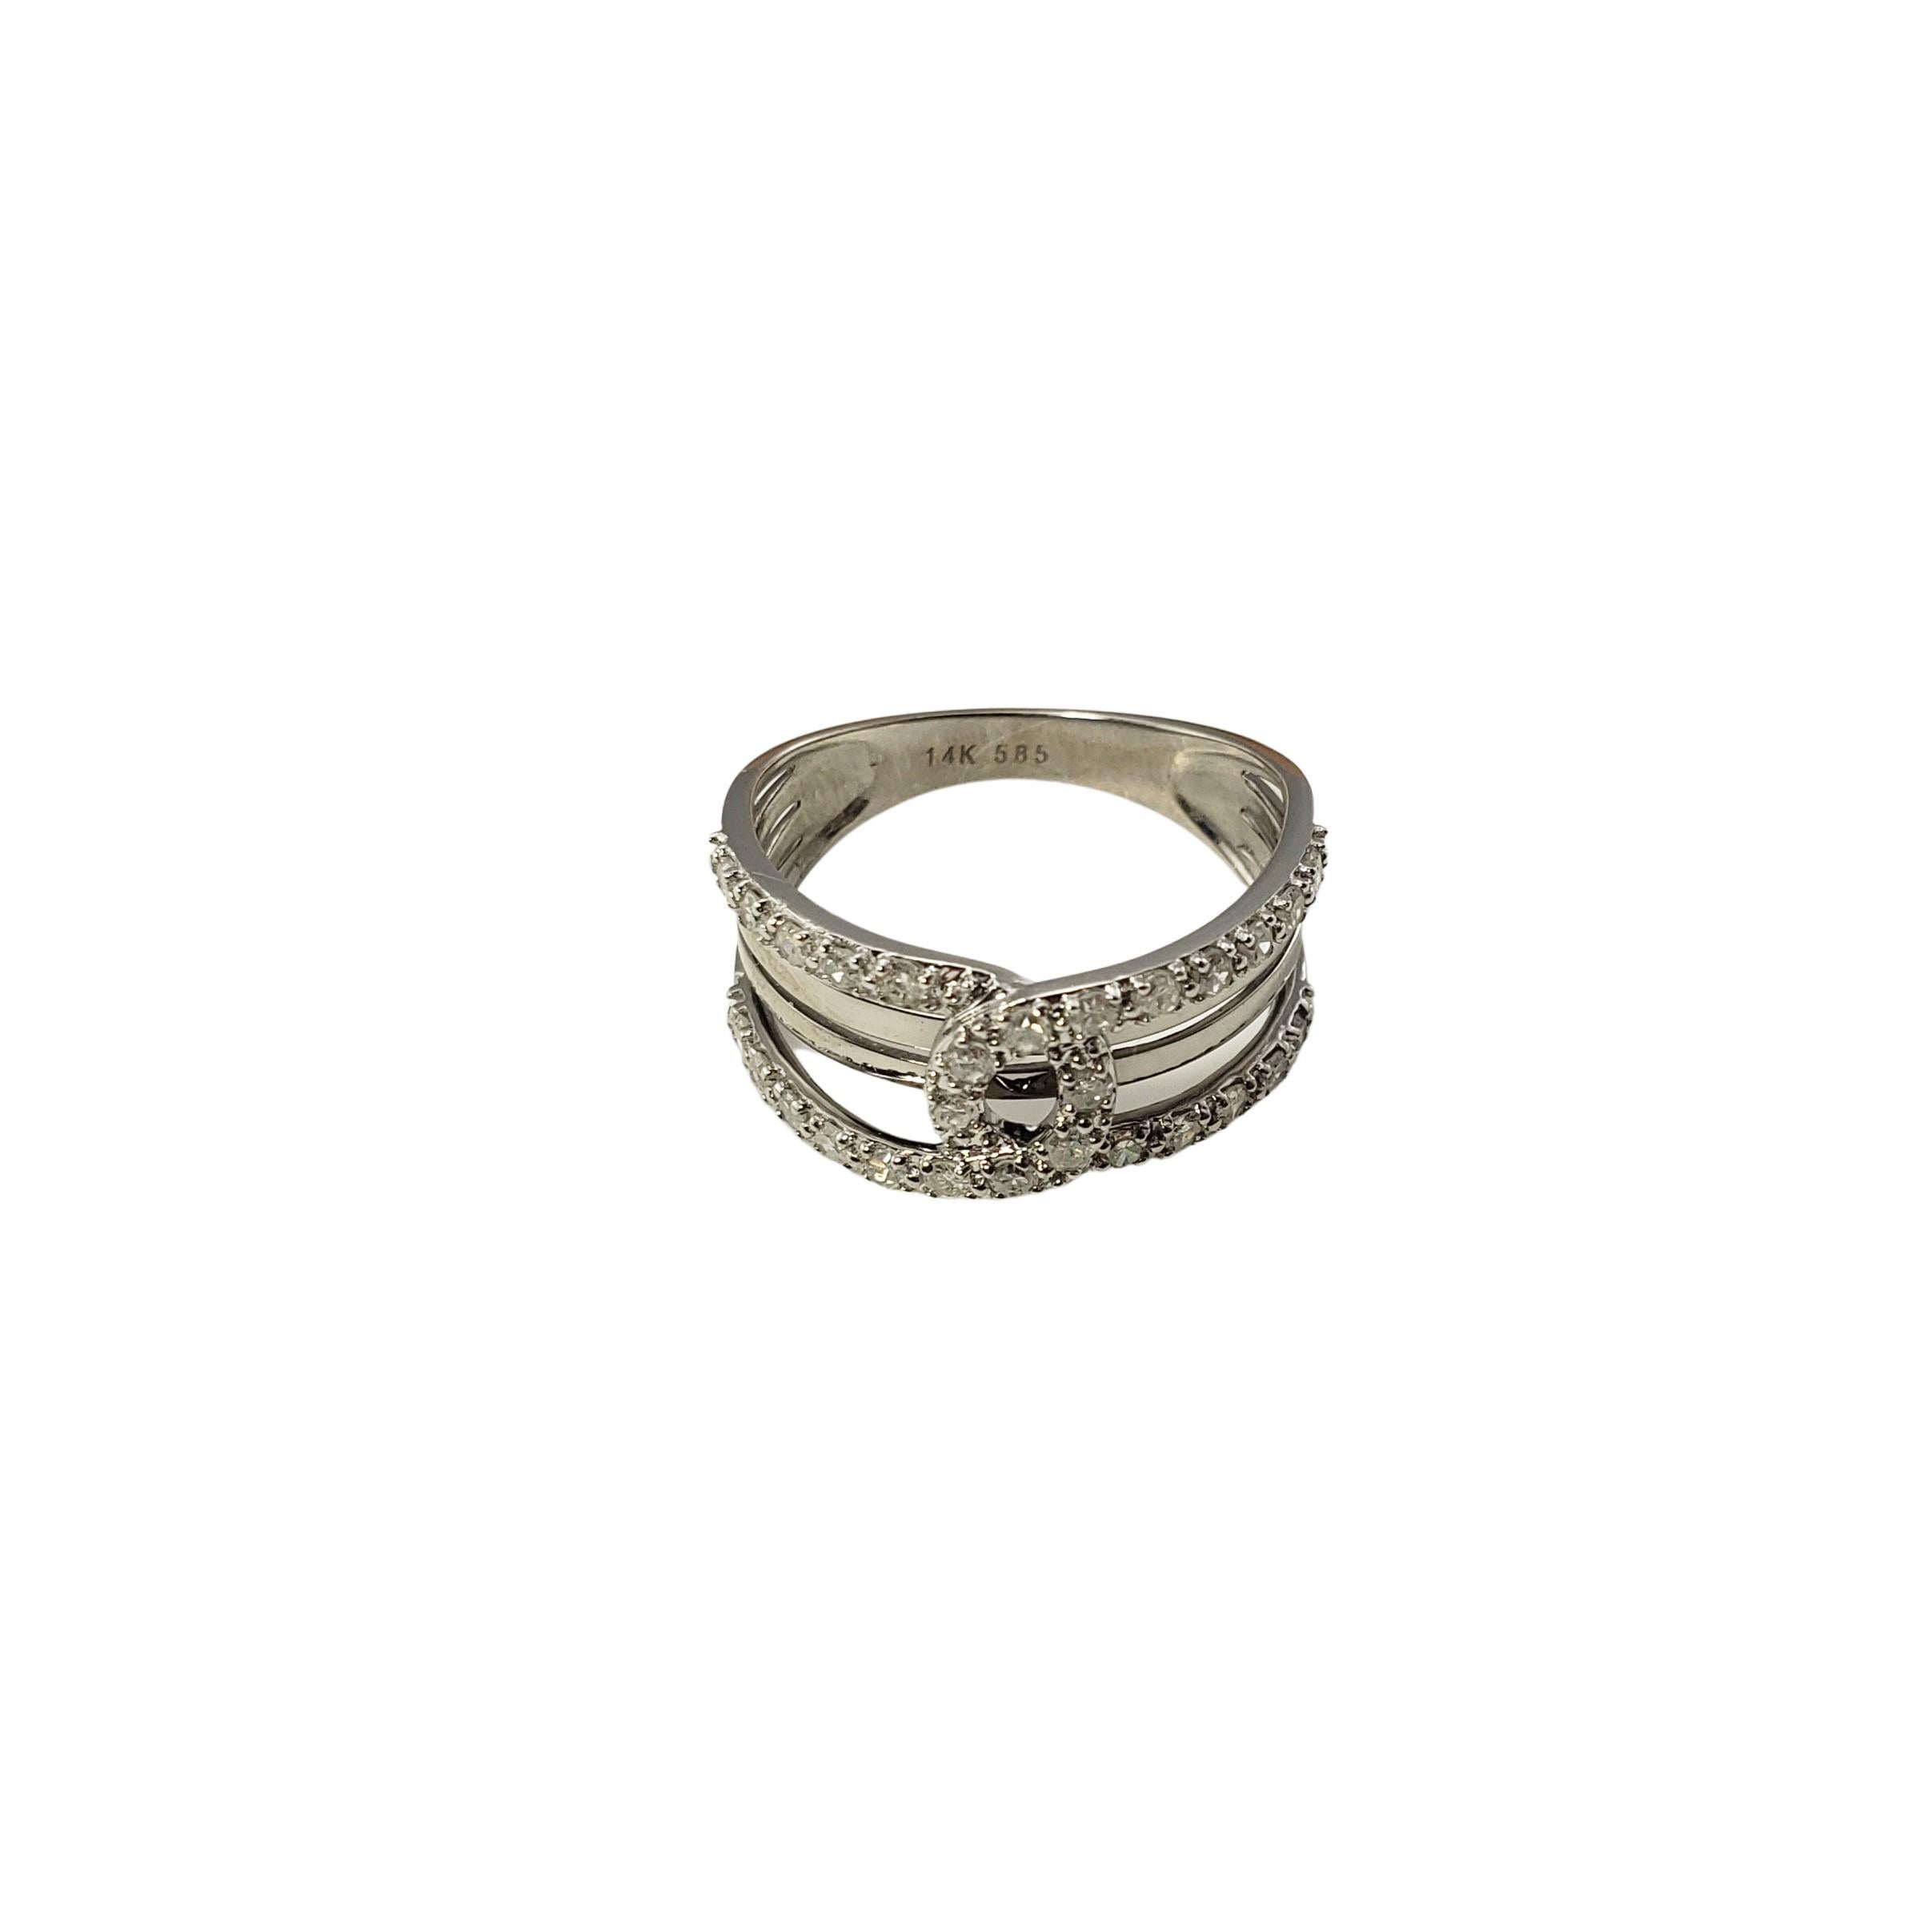 14 Karat White Gold and Diamond Ring Size 7.25-

This sparkling band features 28 round single cut diamonds set in beautifully detailed 14K white gold.  Width:  10 mm.  Shank:  3 mm.

Total diamond weight:  .50 ct.

Diamond color: I

Diamond clarity: